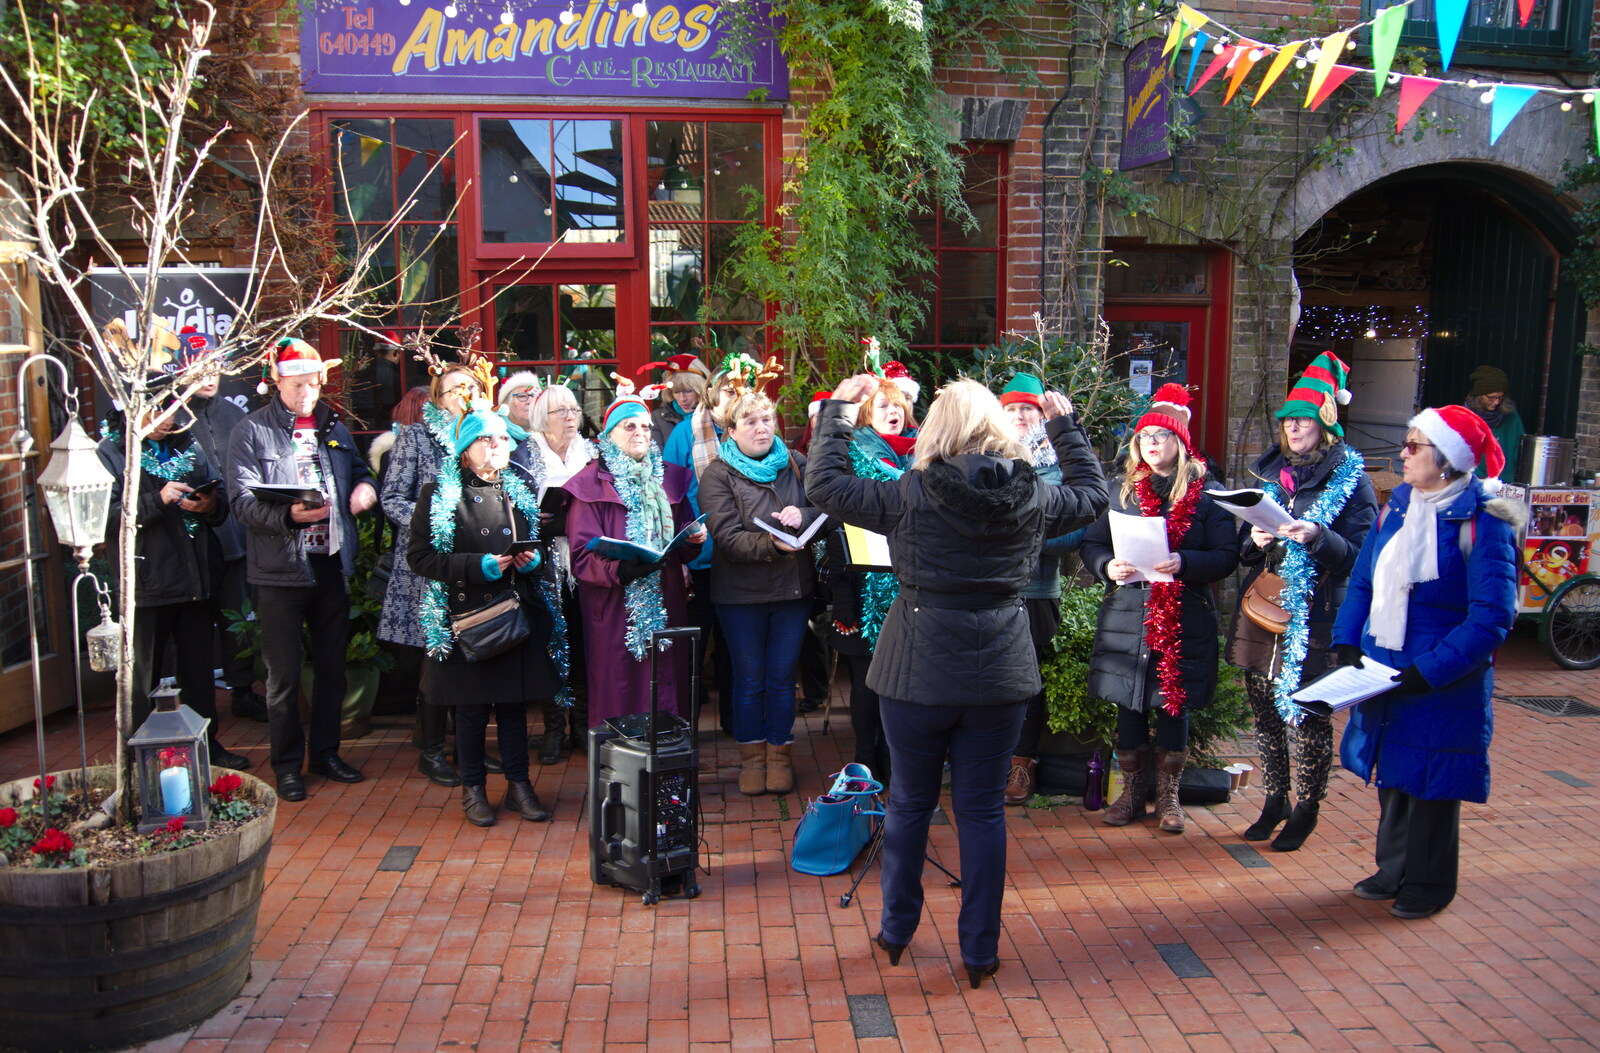 The choir kicks off its session from The St. Nicholas Street Winter Fayre, Diss, Norfolk - 14th December 2019